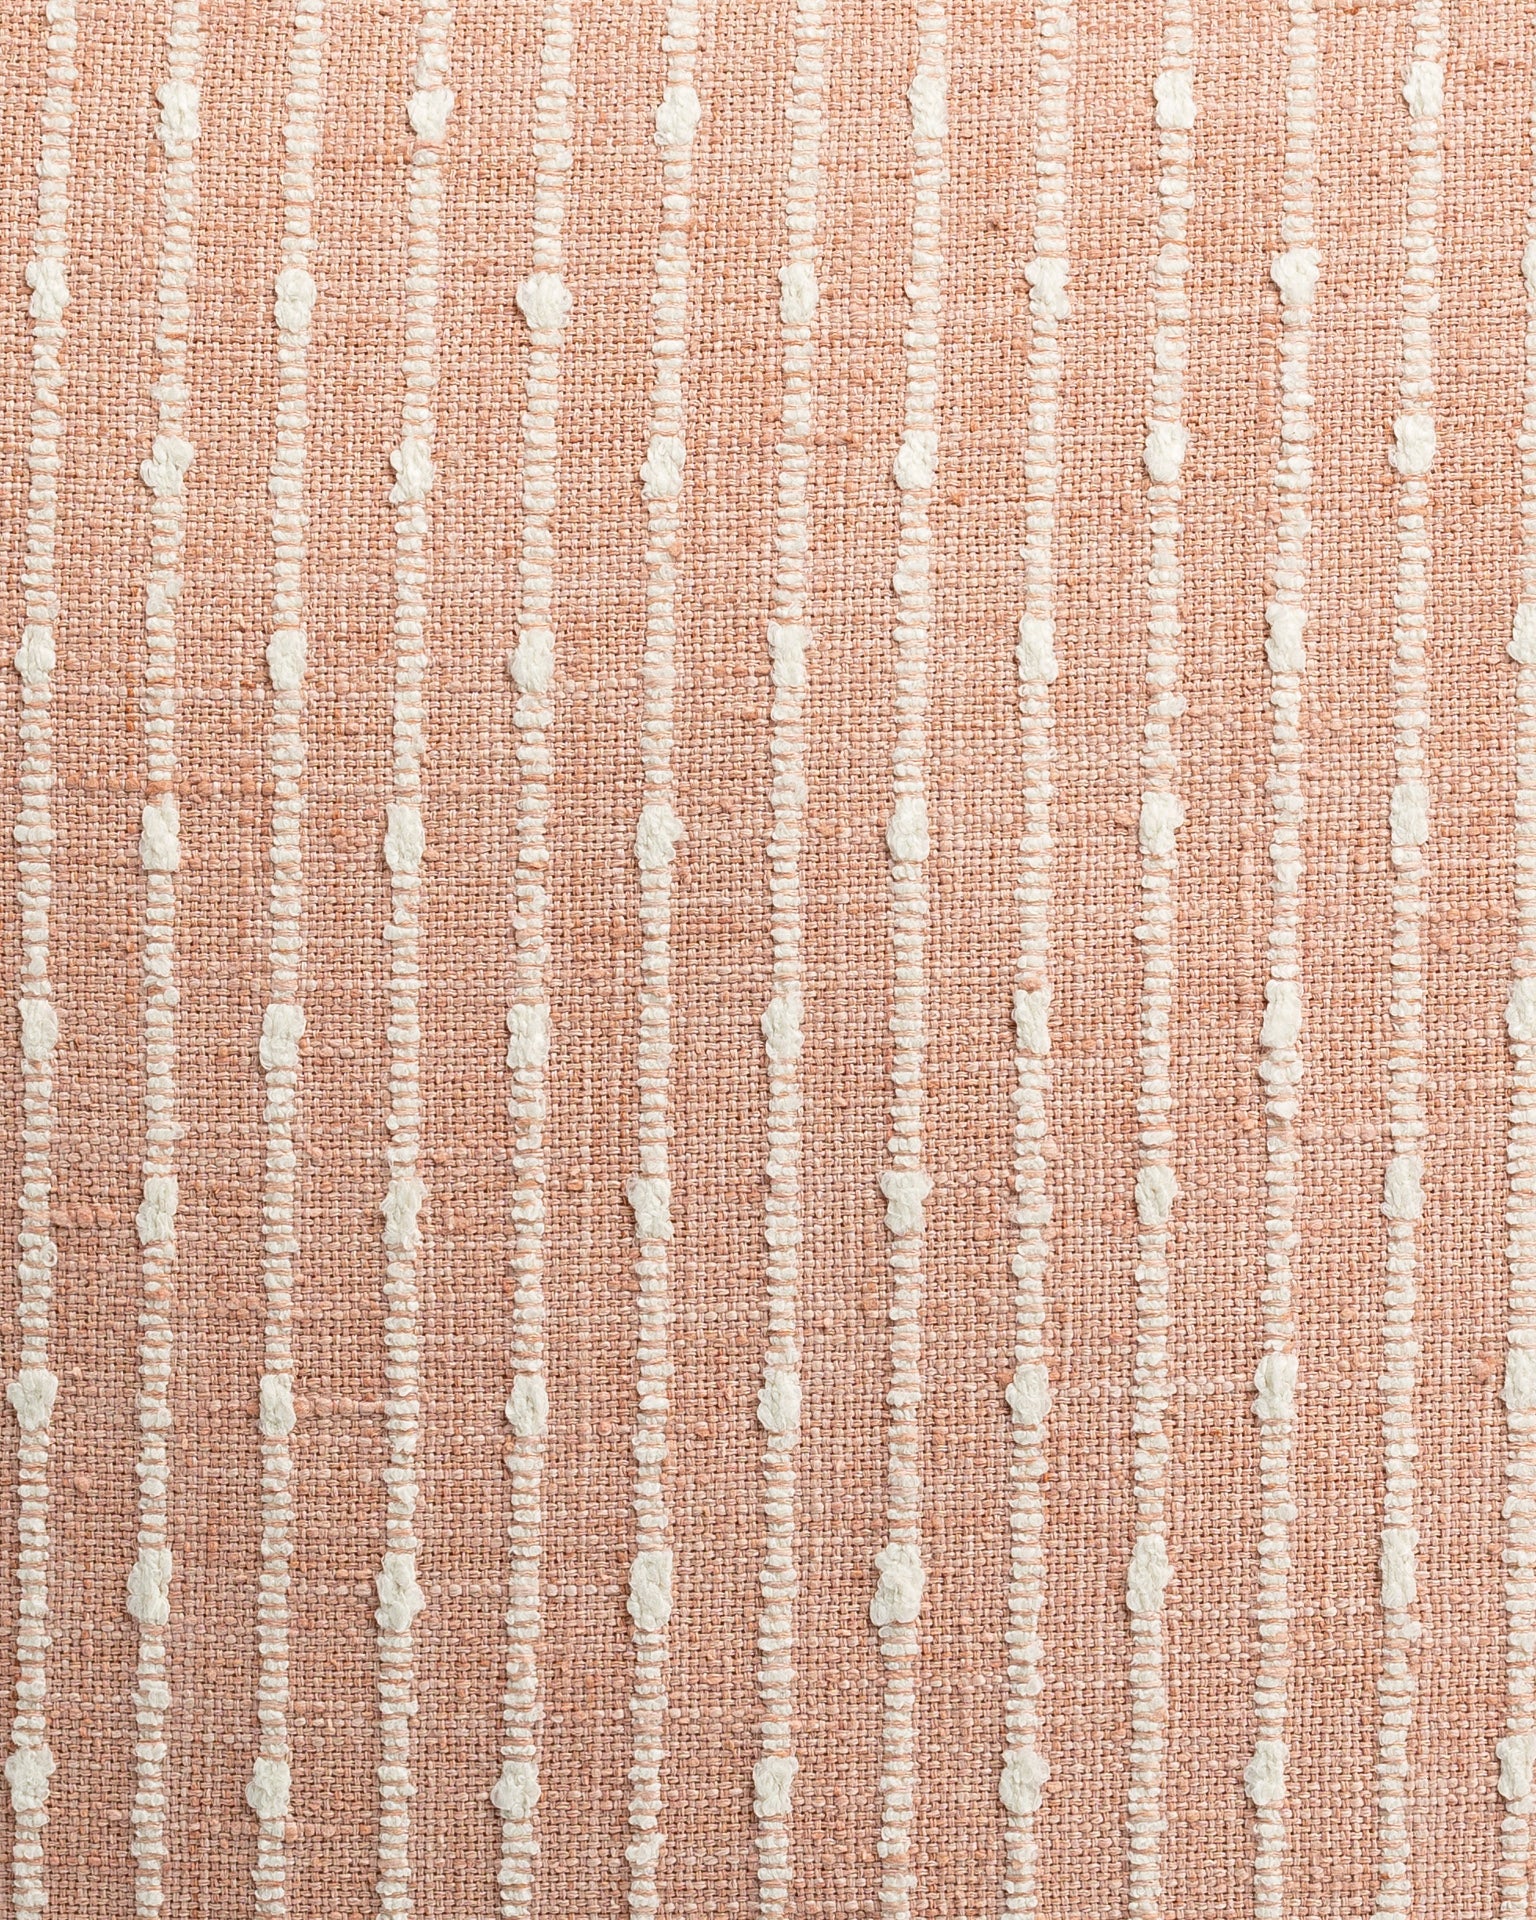 Close-up of a textured fabric with parallel peach-colored stripes and intermittent white tufts, creating a tactile and visually interesting pattern in Gabby&#39;s Hopscotch Blush 26x26 style.